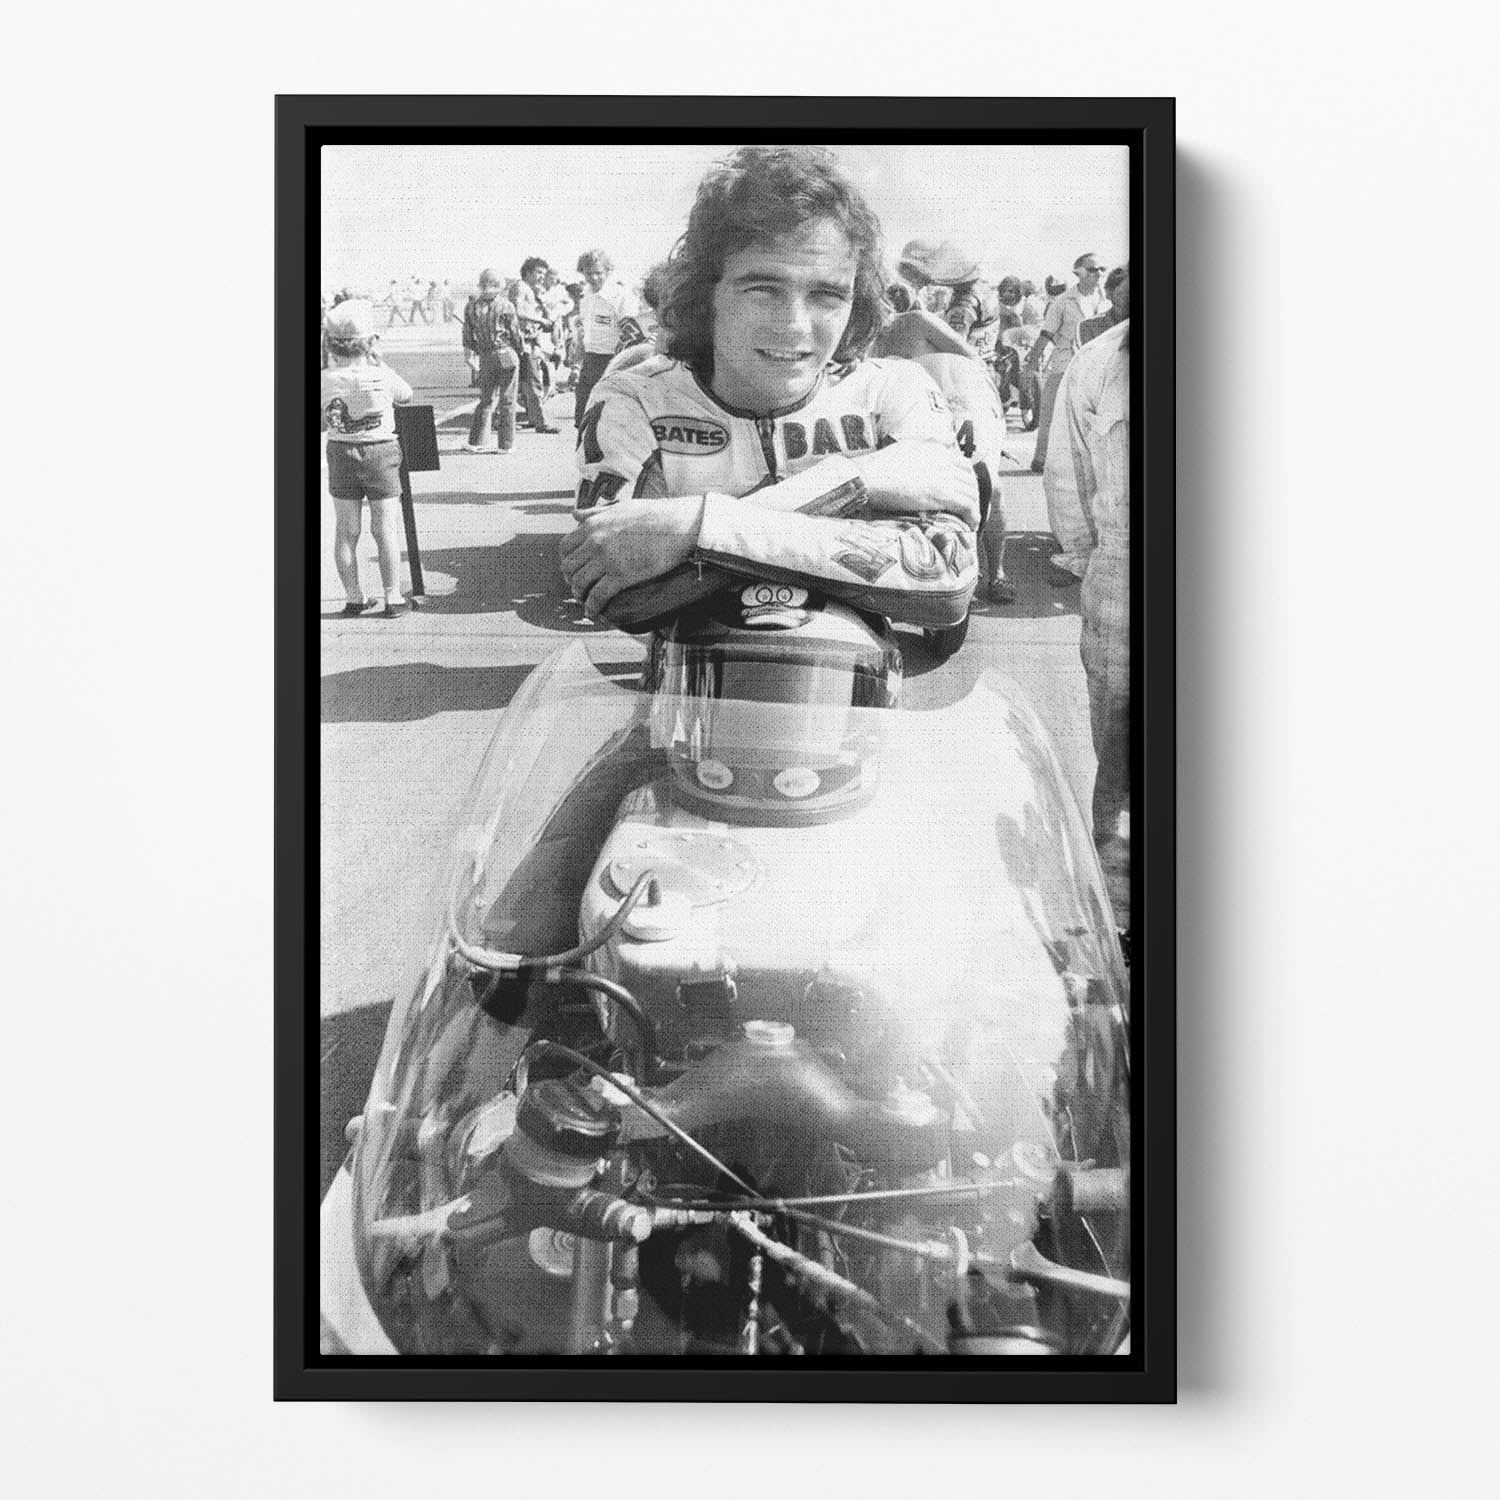 Barry Sheene motorcycle racing champion Floating Framed Canvas